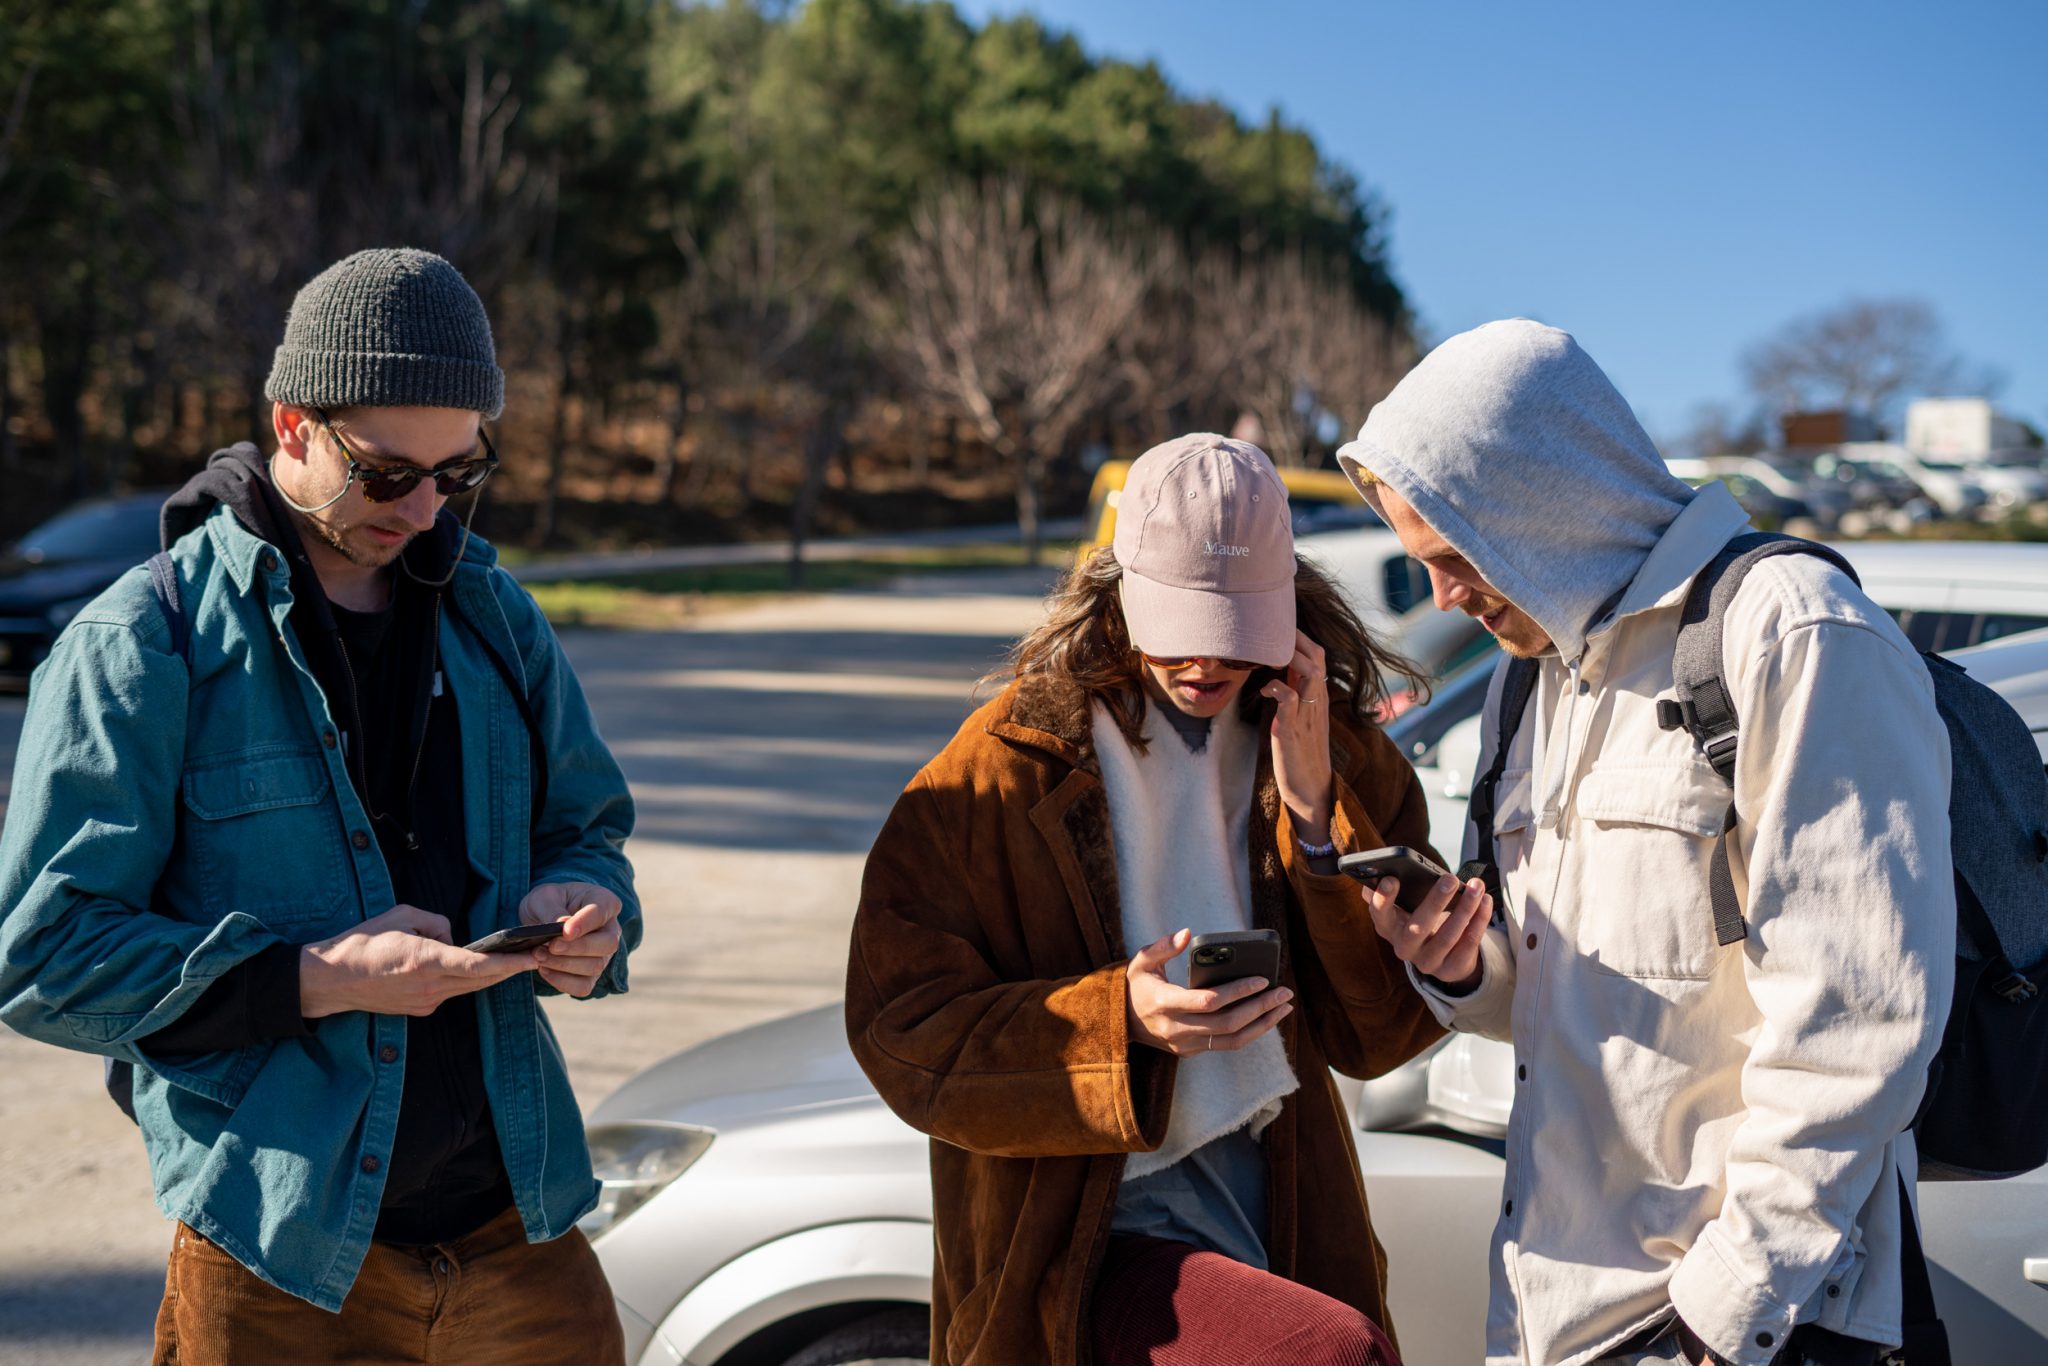 Three young people looking on their smartphones in the sun while standing in a carpark.